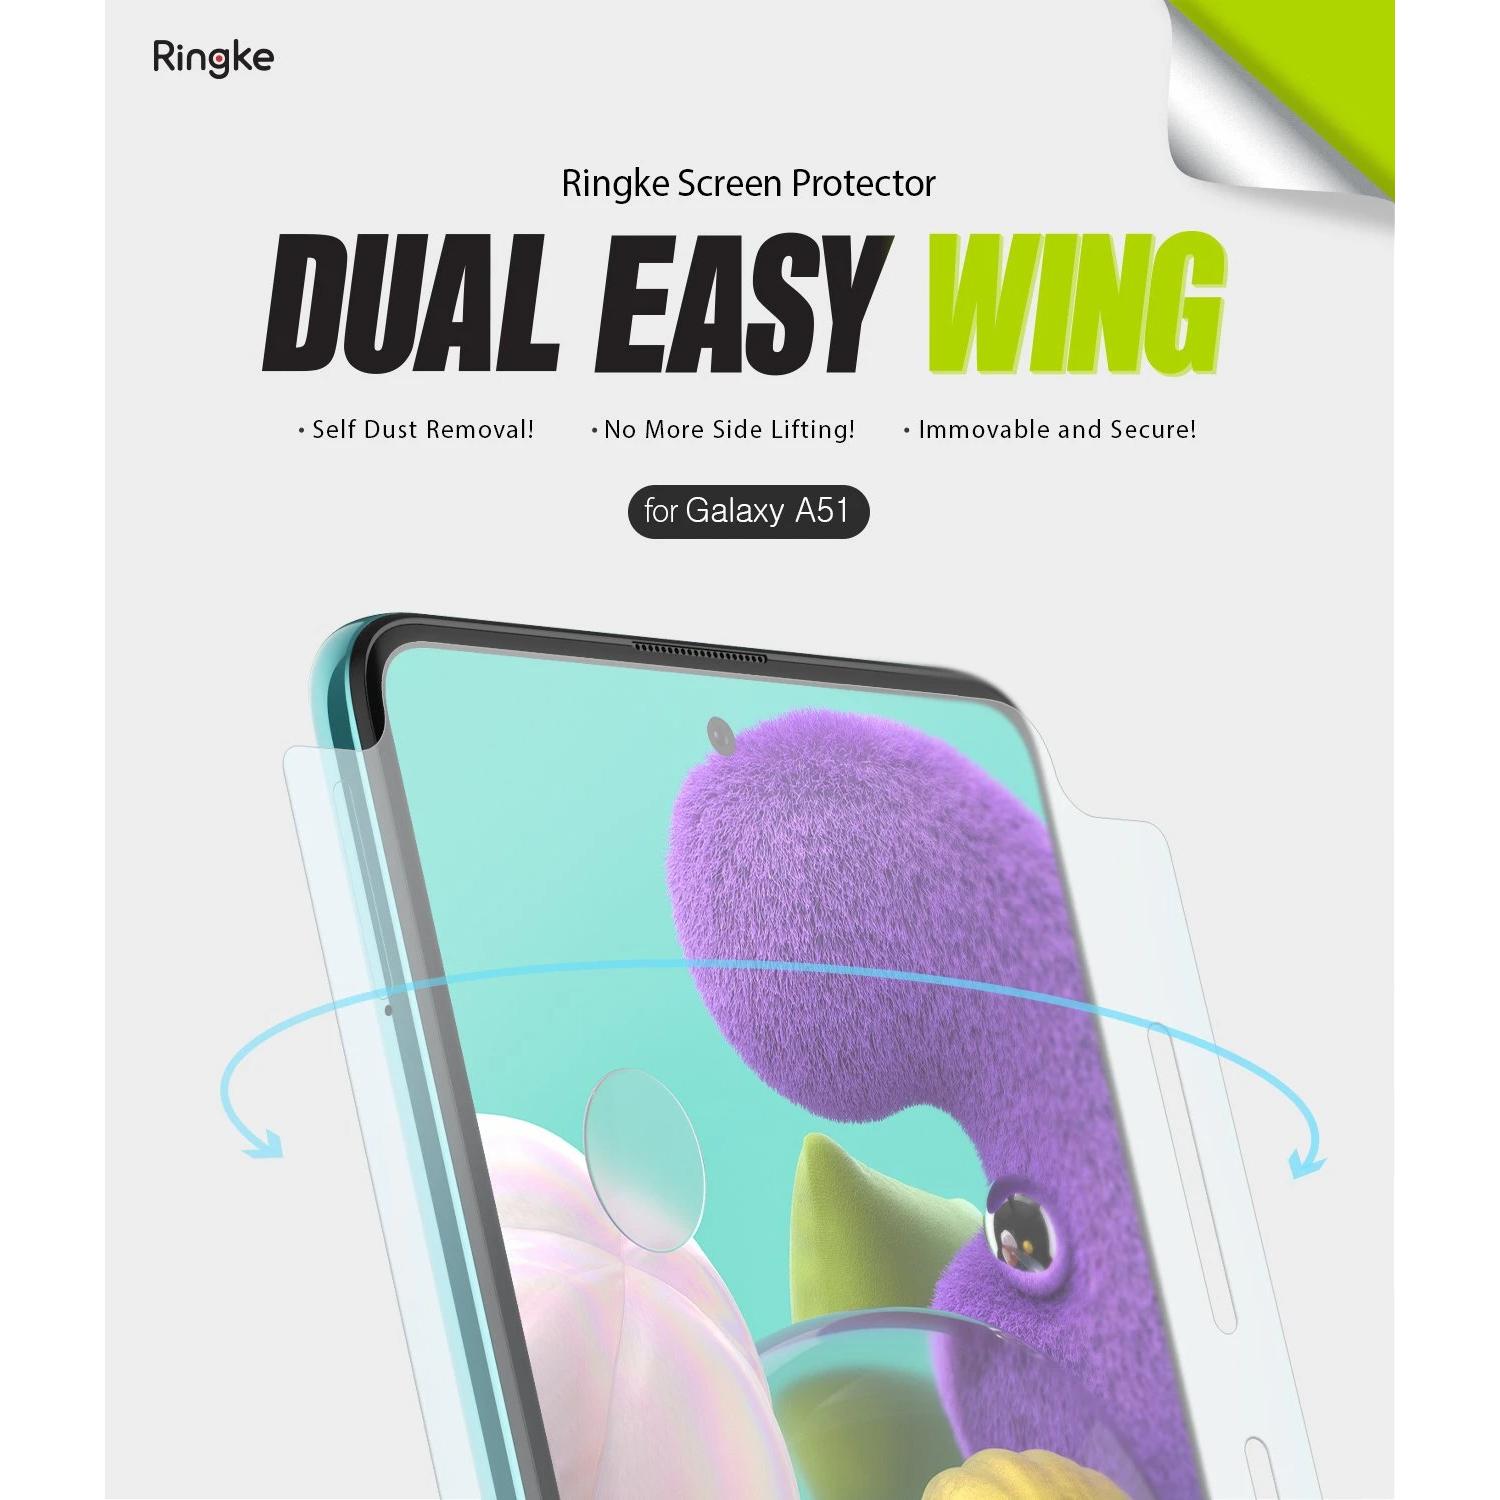 Dual Easy Wing Screen Protector Galaxy A51 (2-pack)